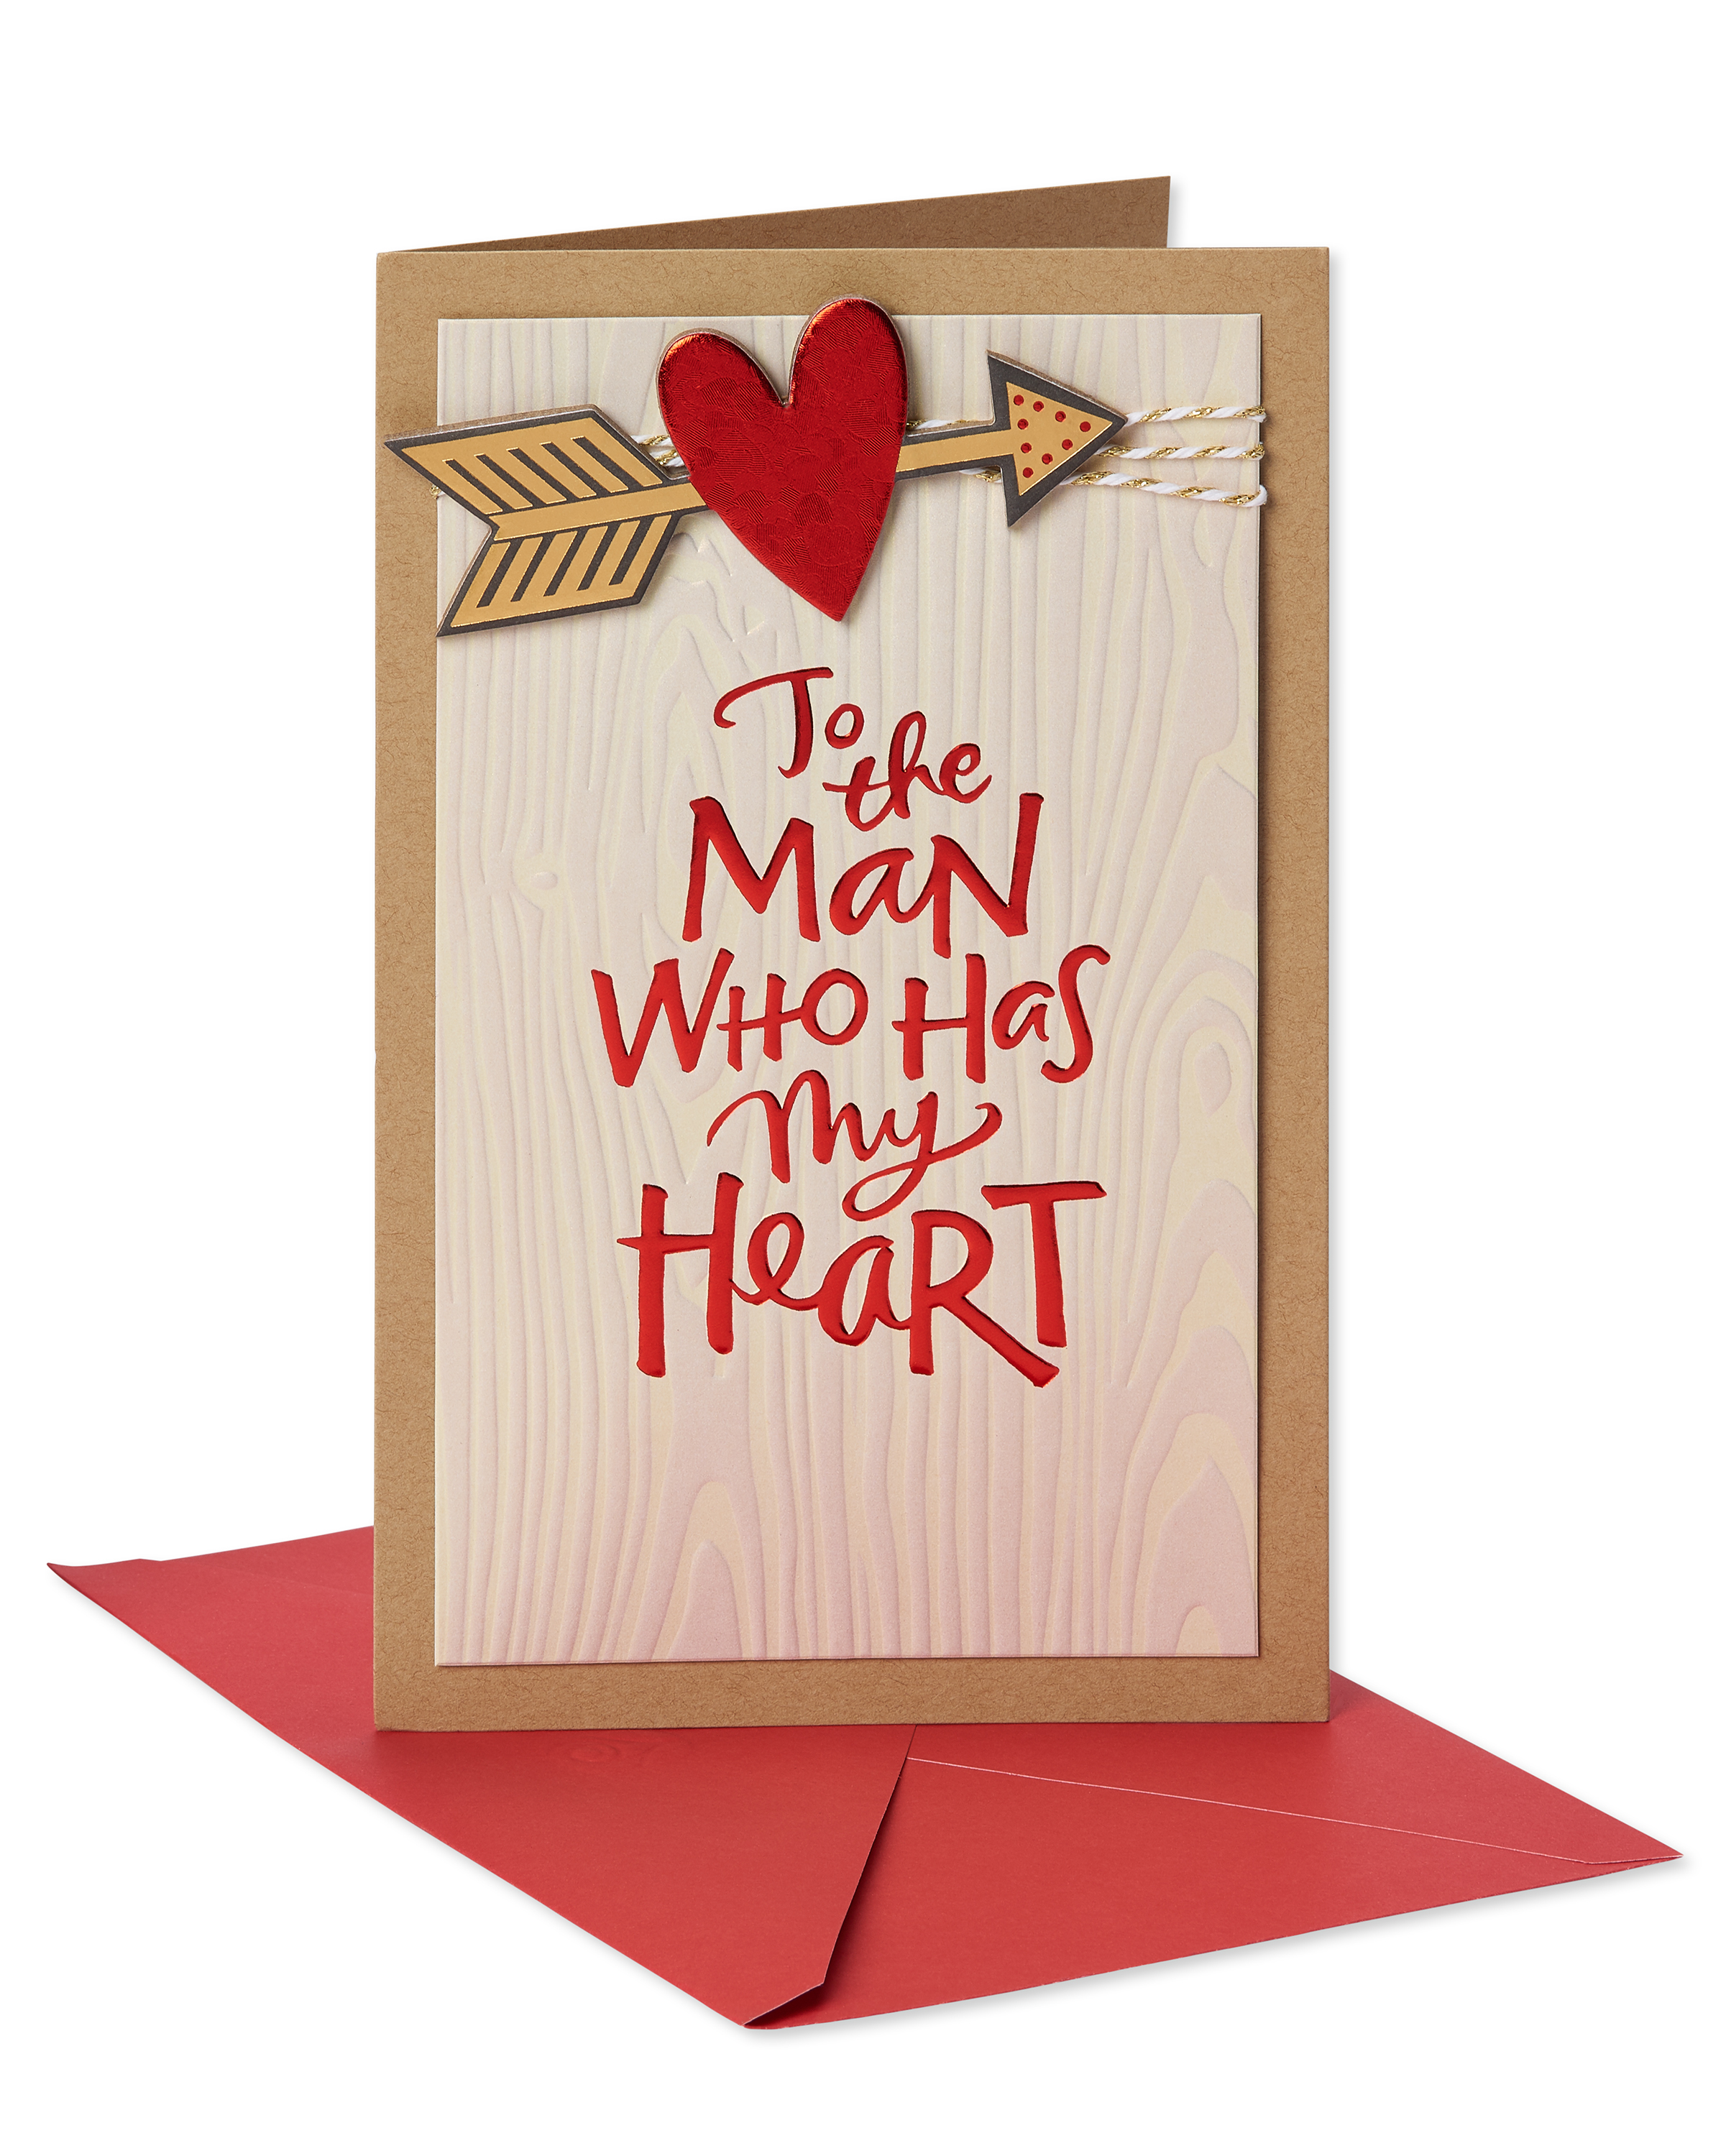 American Greetings Romantic Valentine's Day Card for Him (Man Who Has My Heart) - image 1 of 3